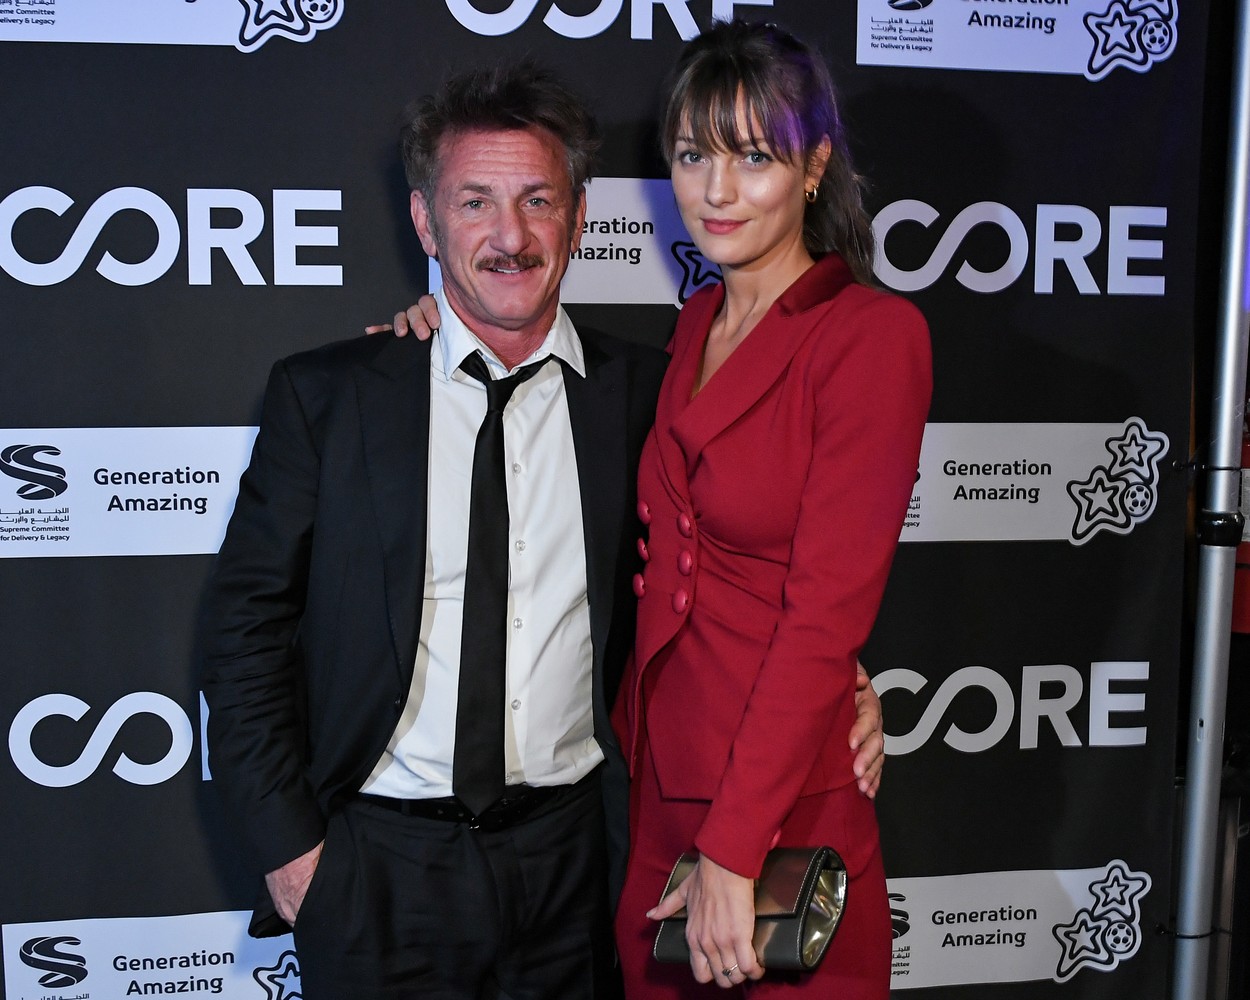 Sean Penn and Leila George
Sean Penn Hosts 10th Anniversary Gala Benefiting CORE, Inside, The Wiltern, Los Angeles, USA - 15 Jan 2020, Image: 493223507, License: Rights-managed, Restrictions: , Model Release: no, Credit line: Rob Latour/Variety / Shutterstock Editorial / Profimedia